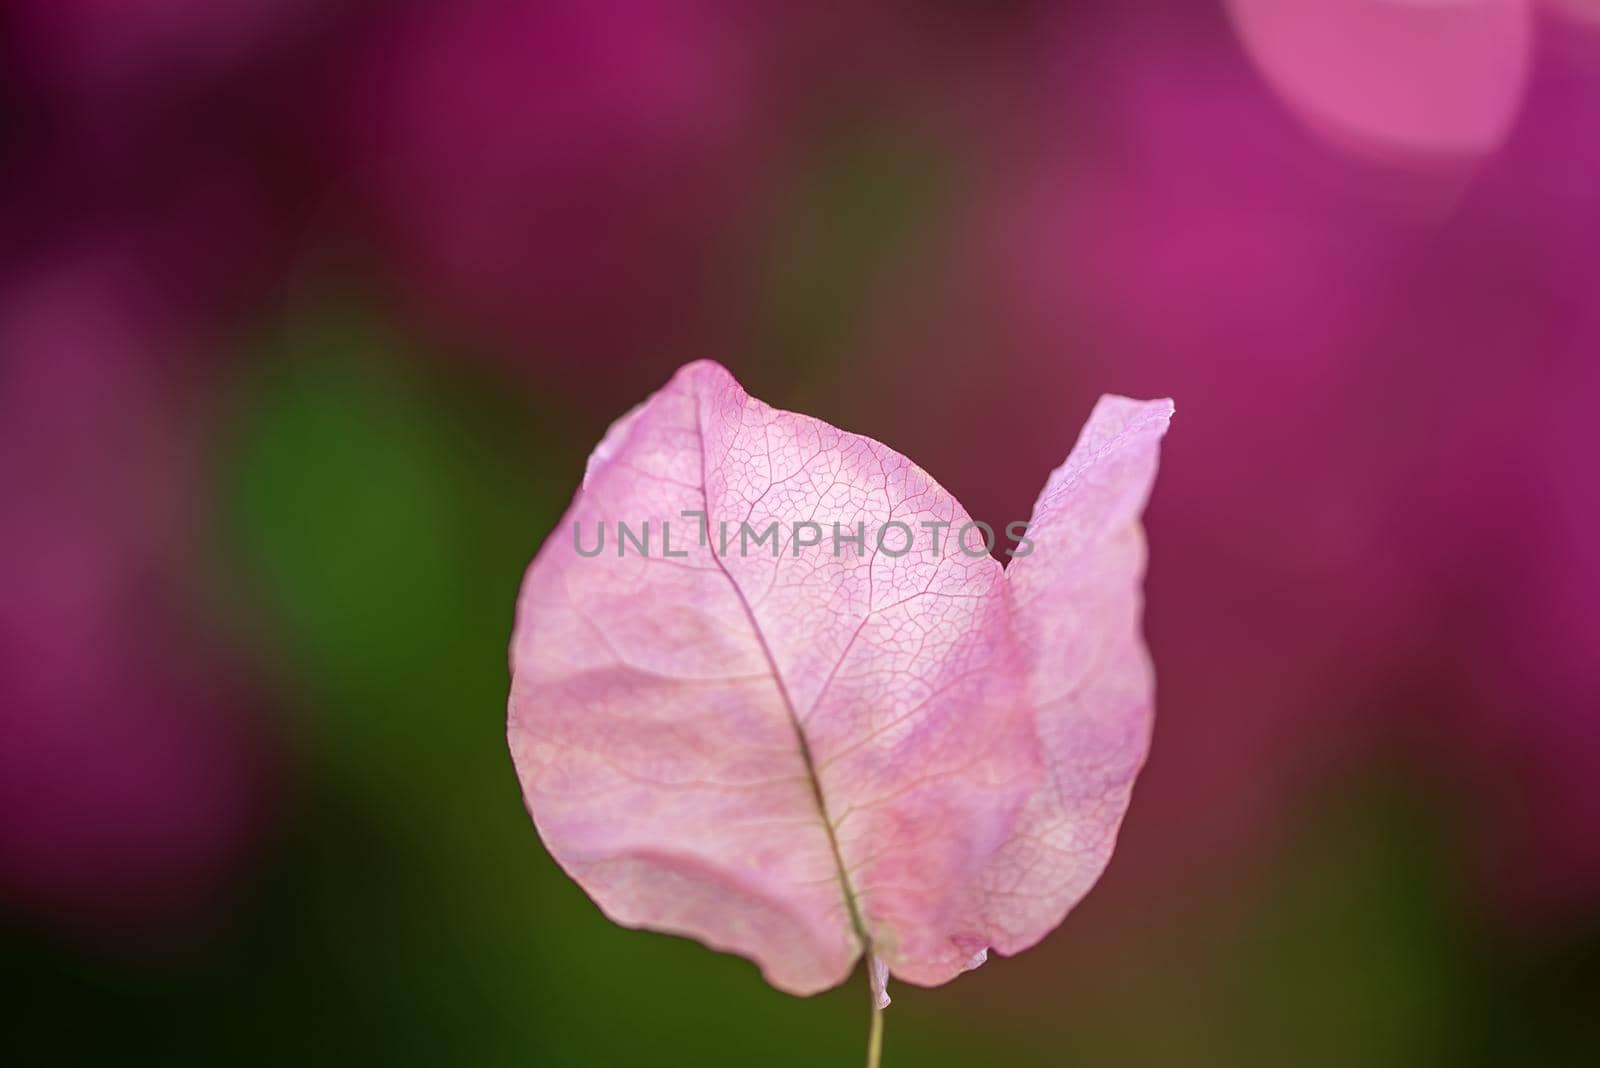 Beautiful purple wild exotic flower of Bougainvillea on the bokeh purple and green background